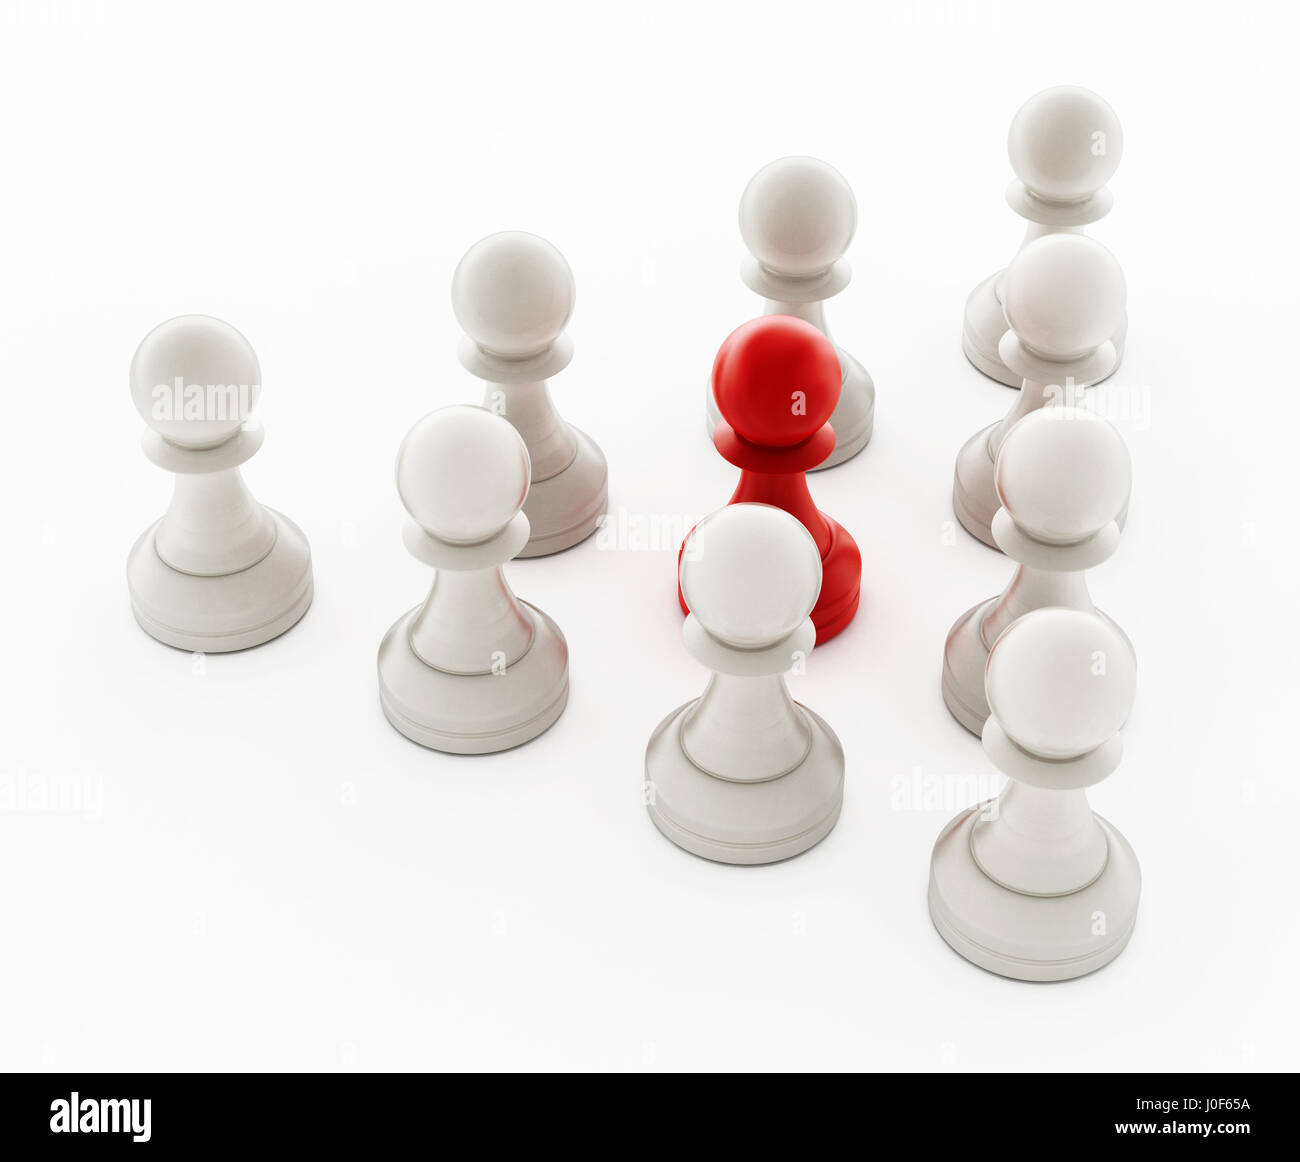 Red chess pawn standing ahead of white pawns. 3D illustration. Stock Photo